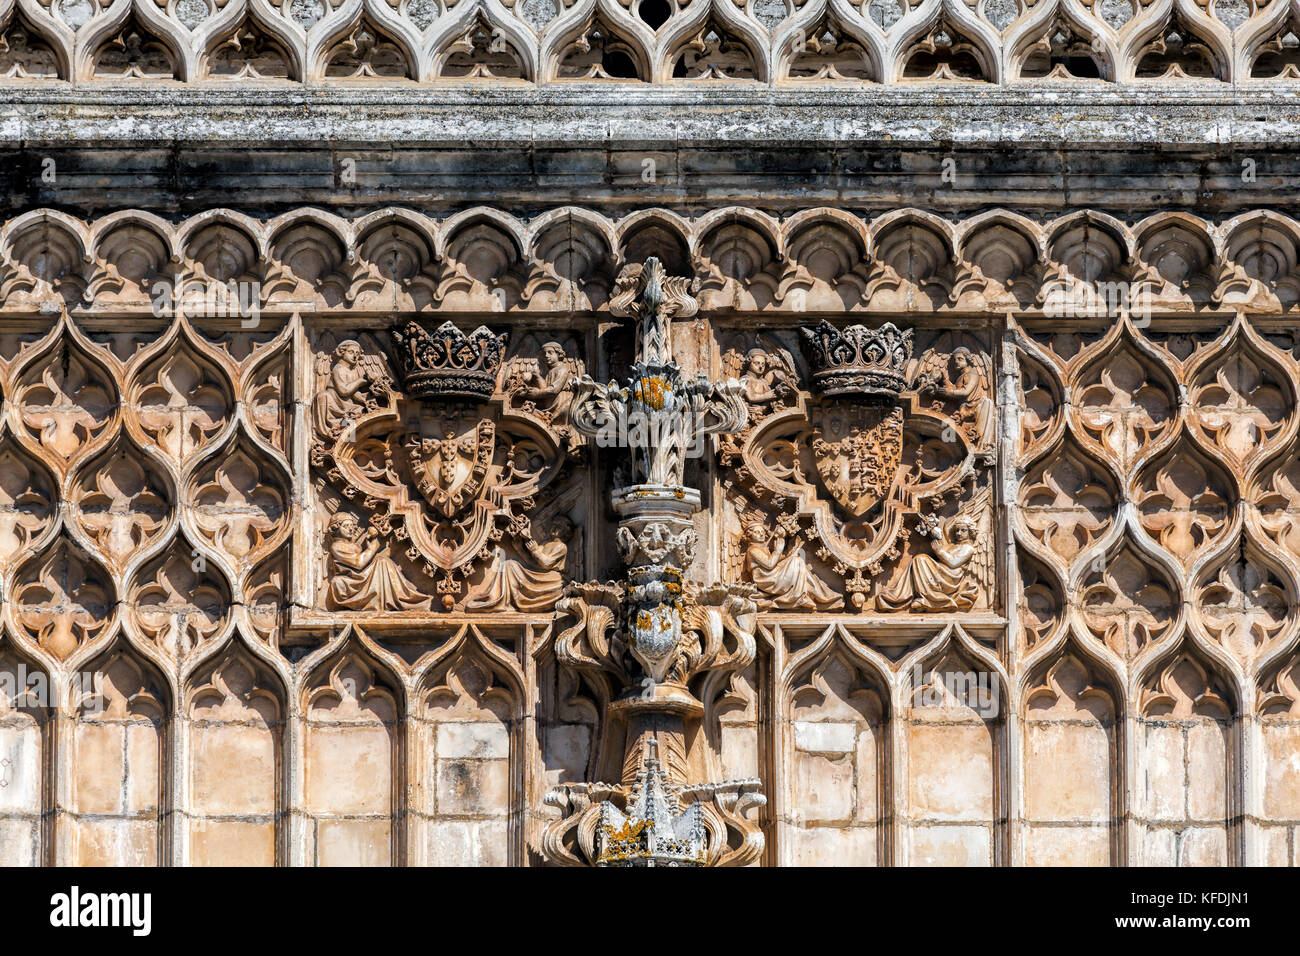 Details of the facade of the 14th century Batalha Monastery in Batalha, Portugal, a prime example of Portuguese Gothic architecture Stock Photo